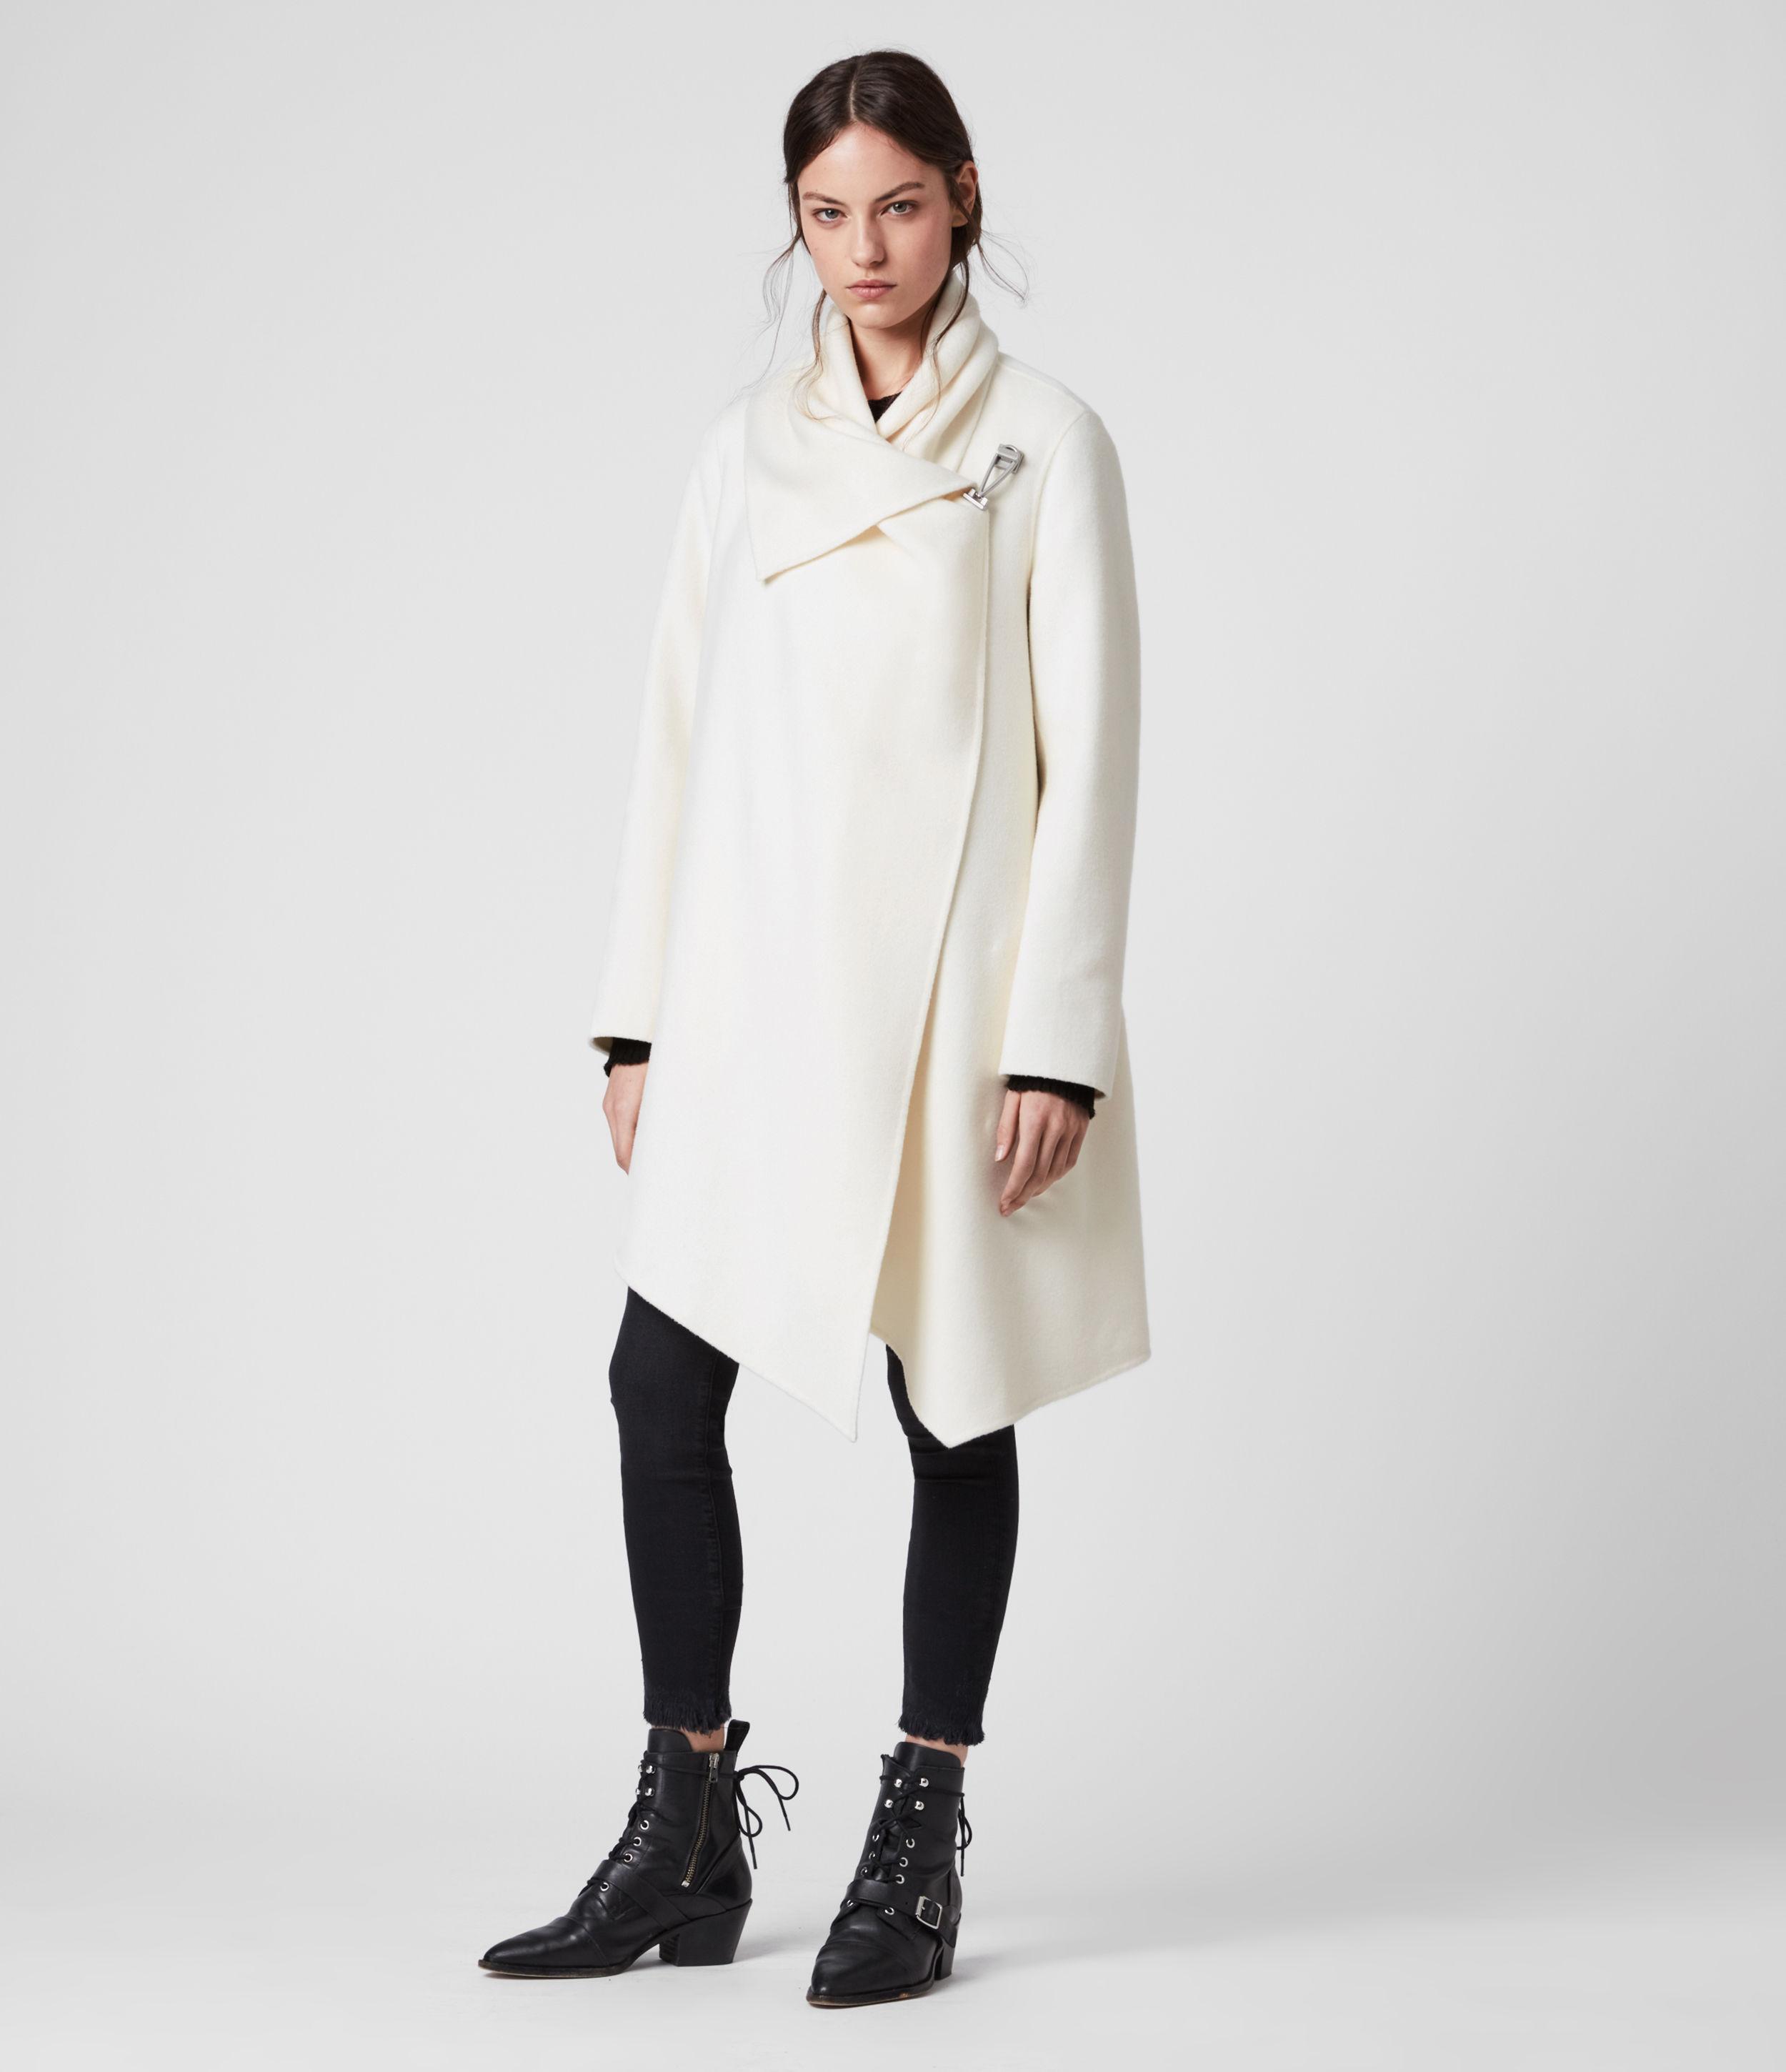 AllSaints Wool Blend Monument Eve Coat in White - Lyst